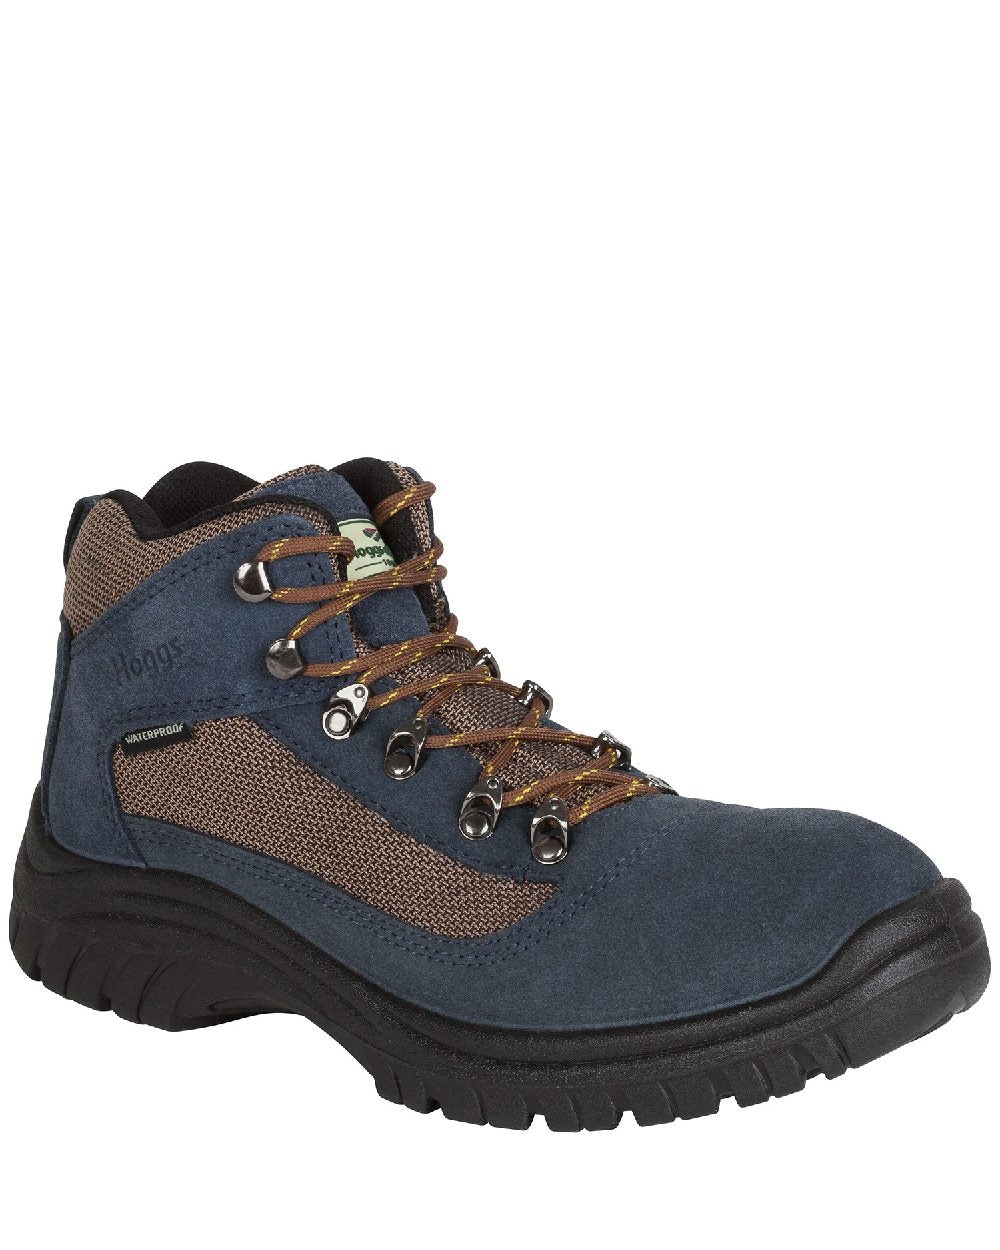 French Navy coloured Hoggs of Fife Rambler Waterproof Hiking Boot on white background 